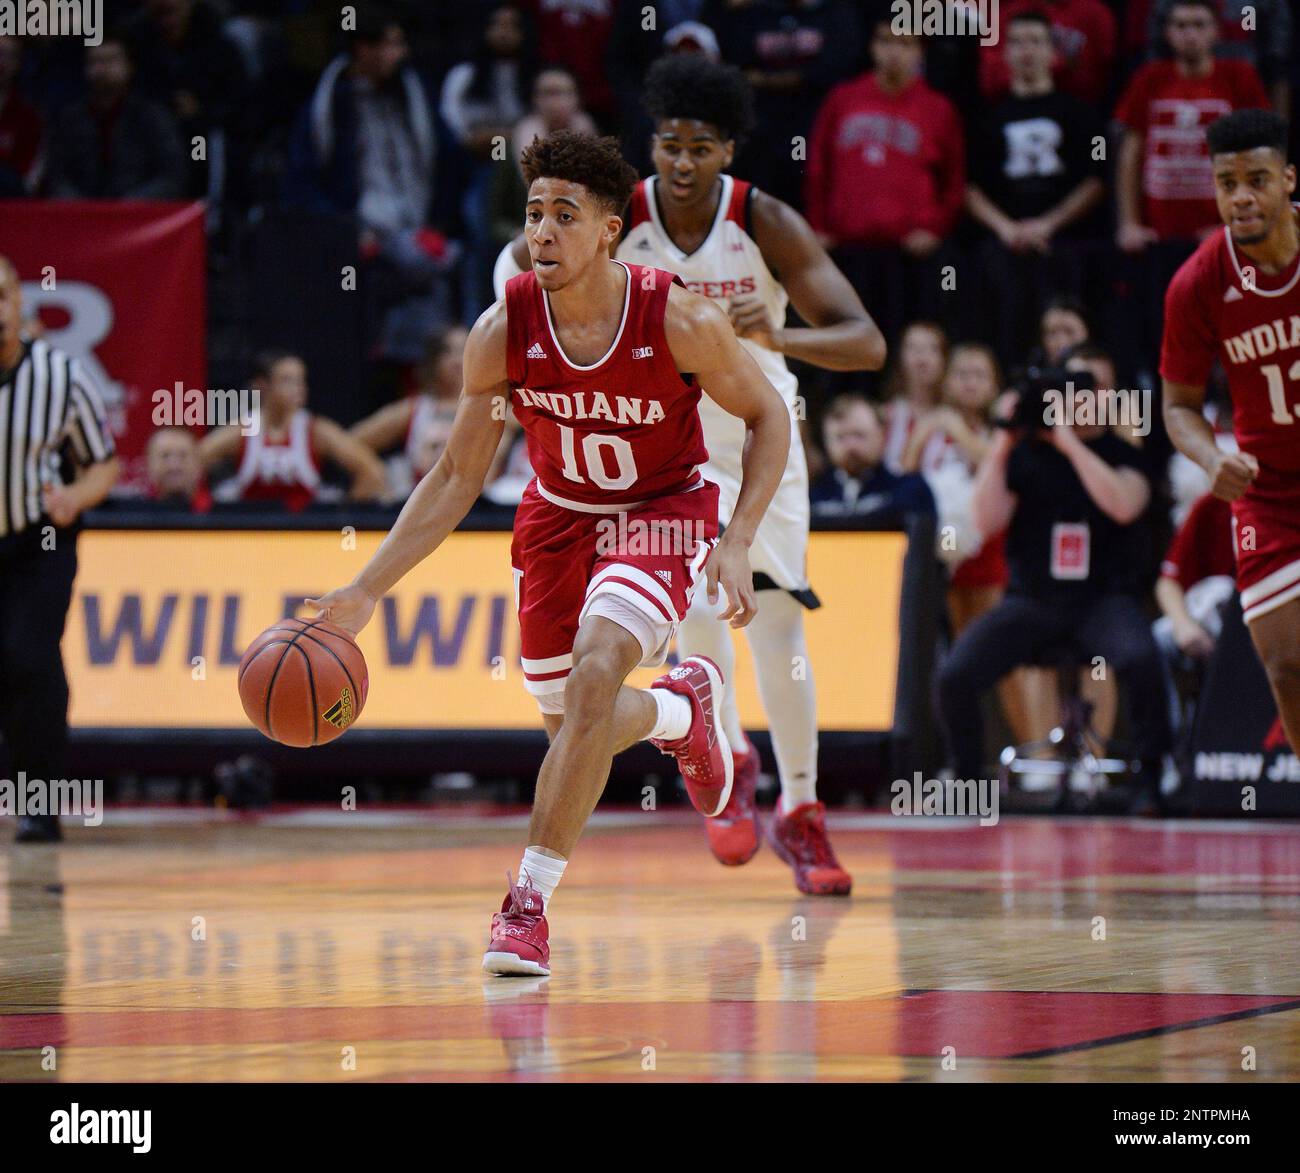 Indiana basketball's jerseys look different vs. Rutgers. Here's why.